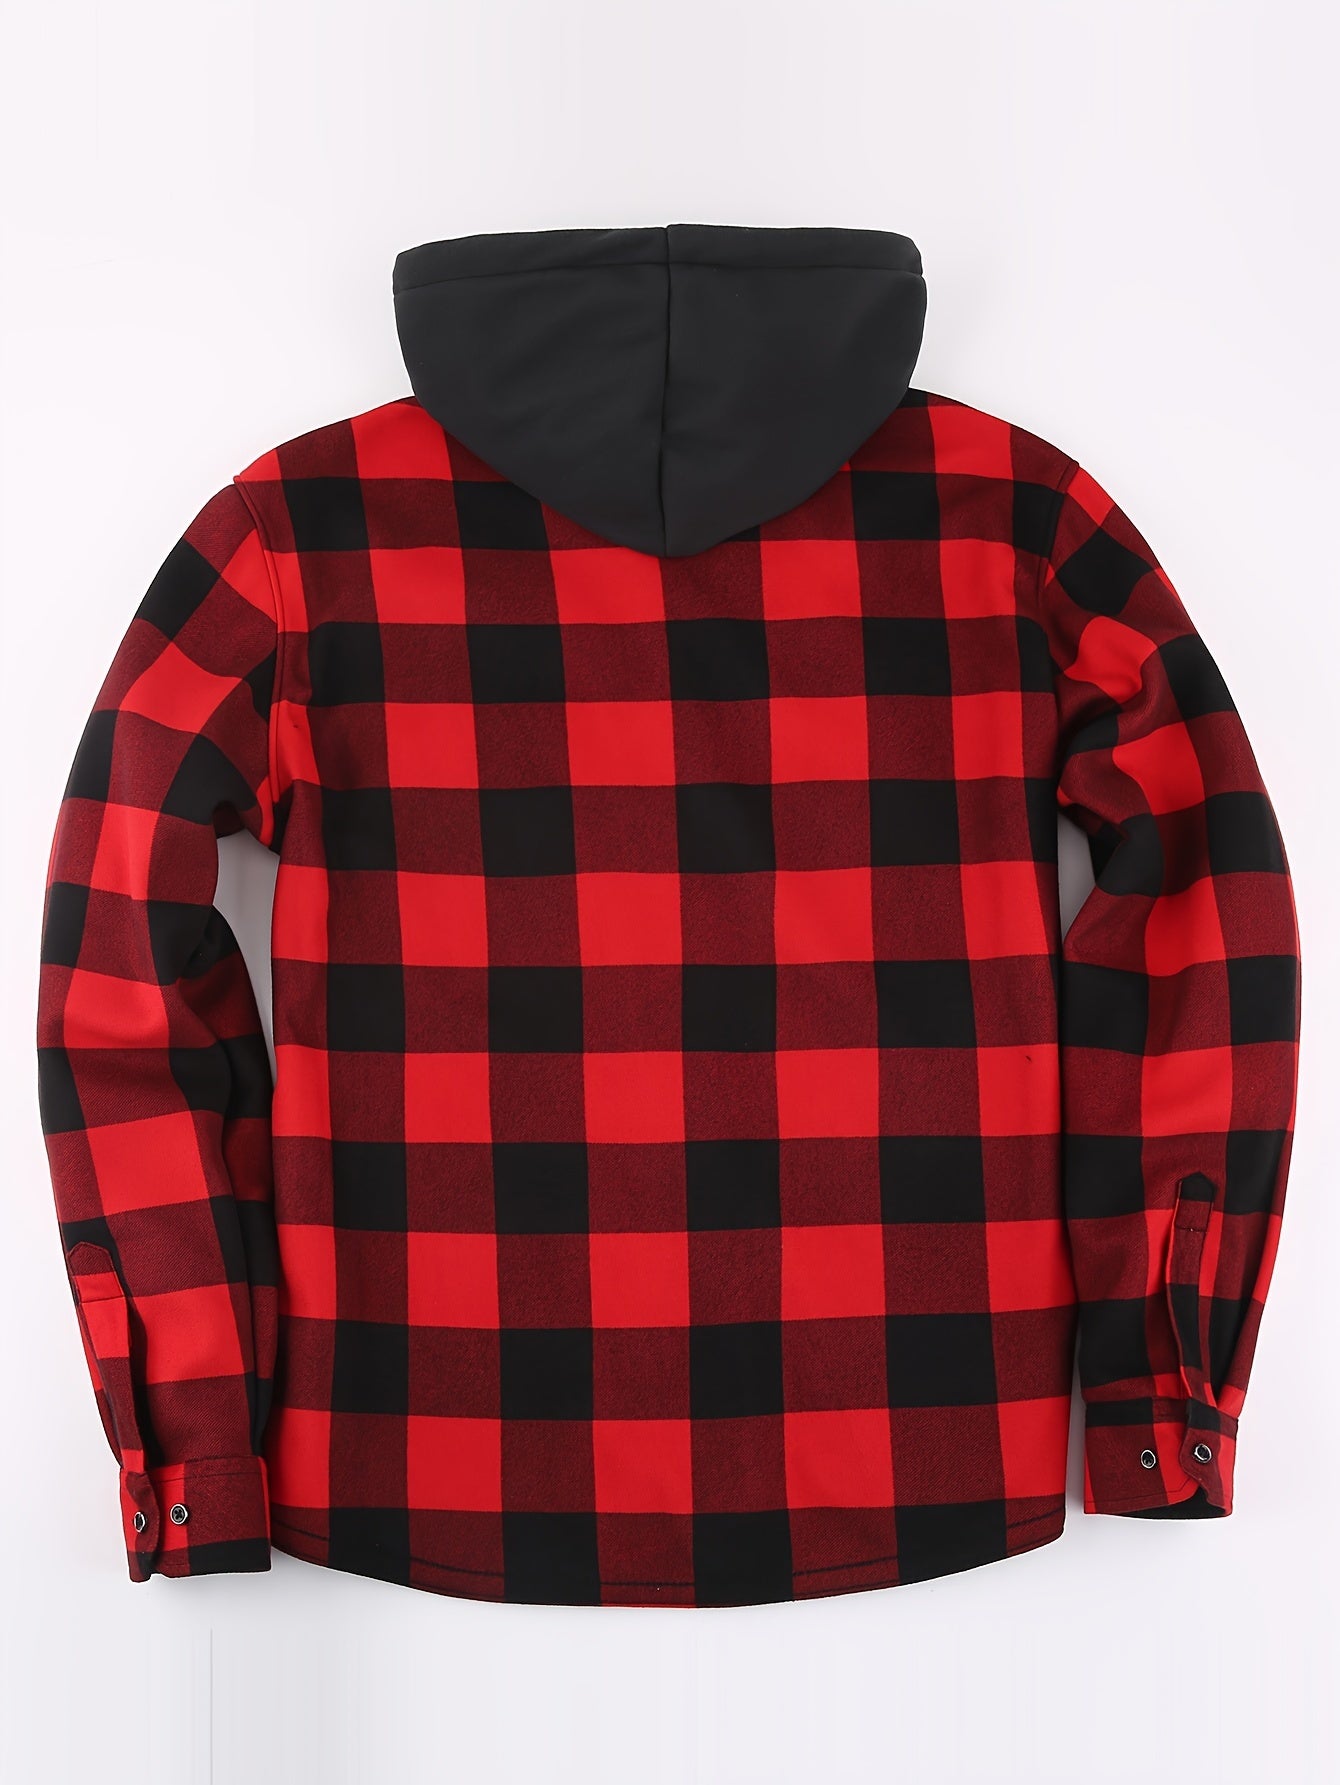 Plus Fleece Warm Daily Men's Plaid Pattern Long Sleeve Hooded Button Shirt For Fall Winter Outdoor, Men's Casual Color Block Shirt Jacket